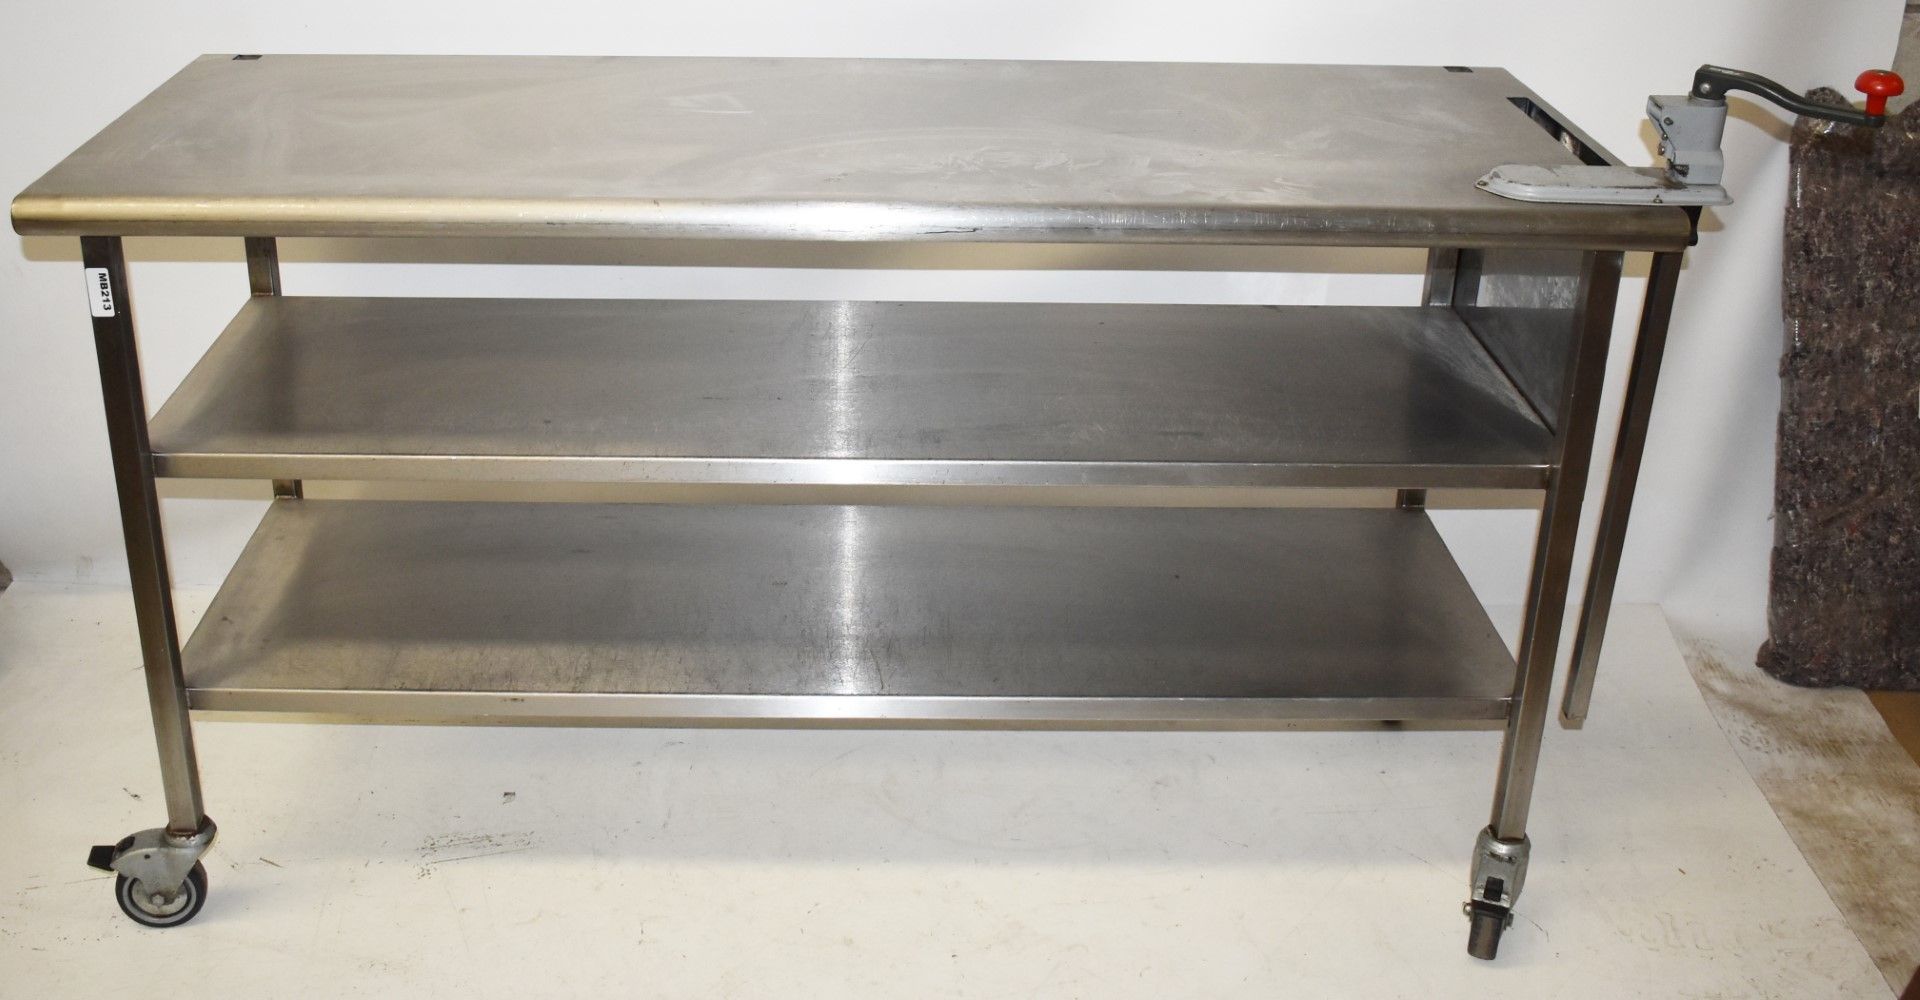 1 x Stainless Steel Prep Bench With Undershelves, Castors and Commercial Tin Opened - H87.5 x W160 x